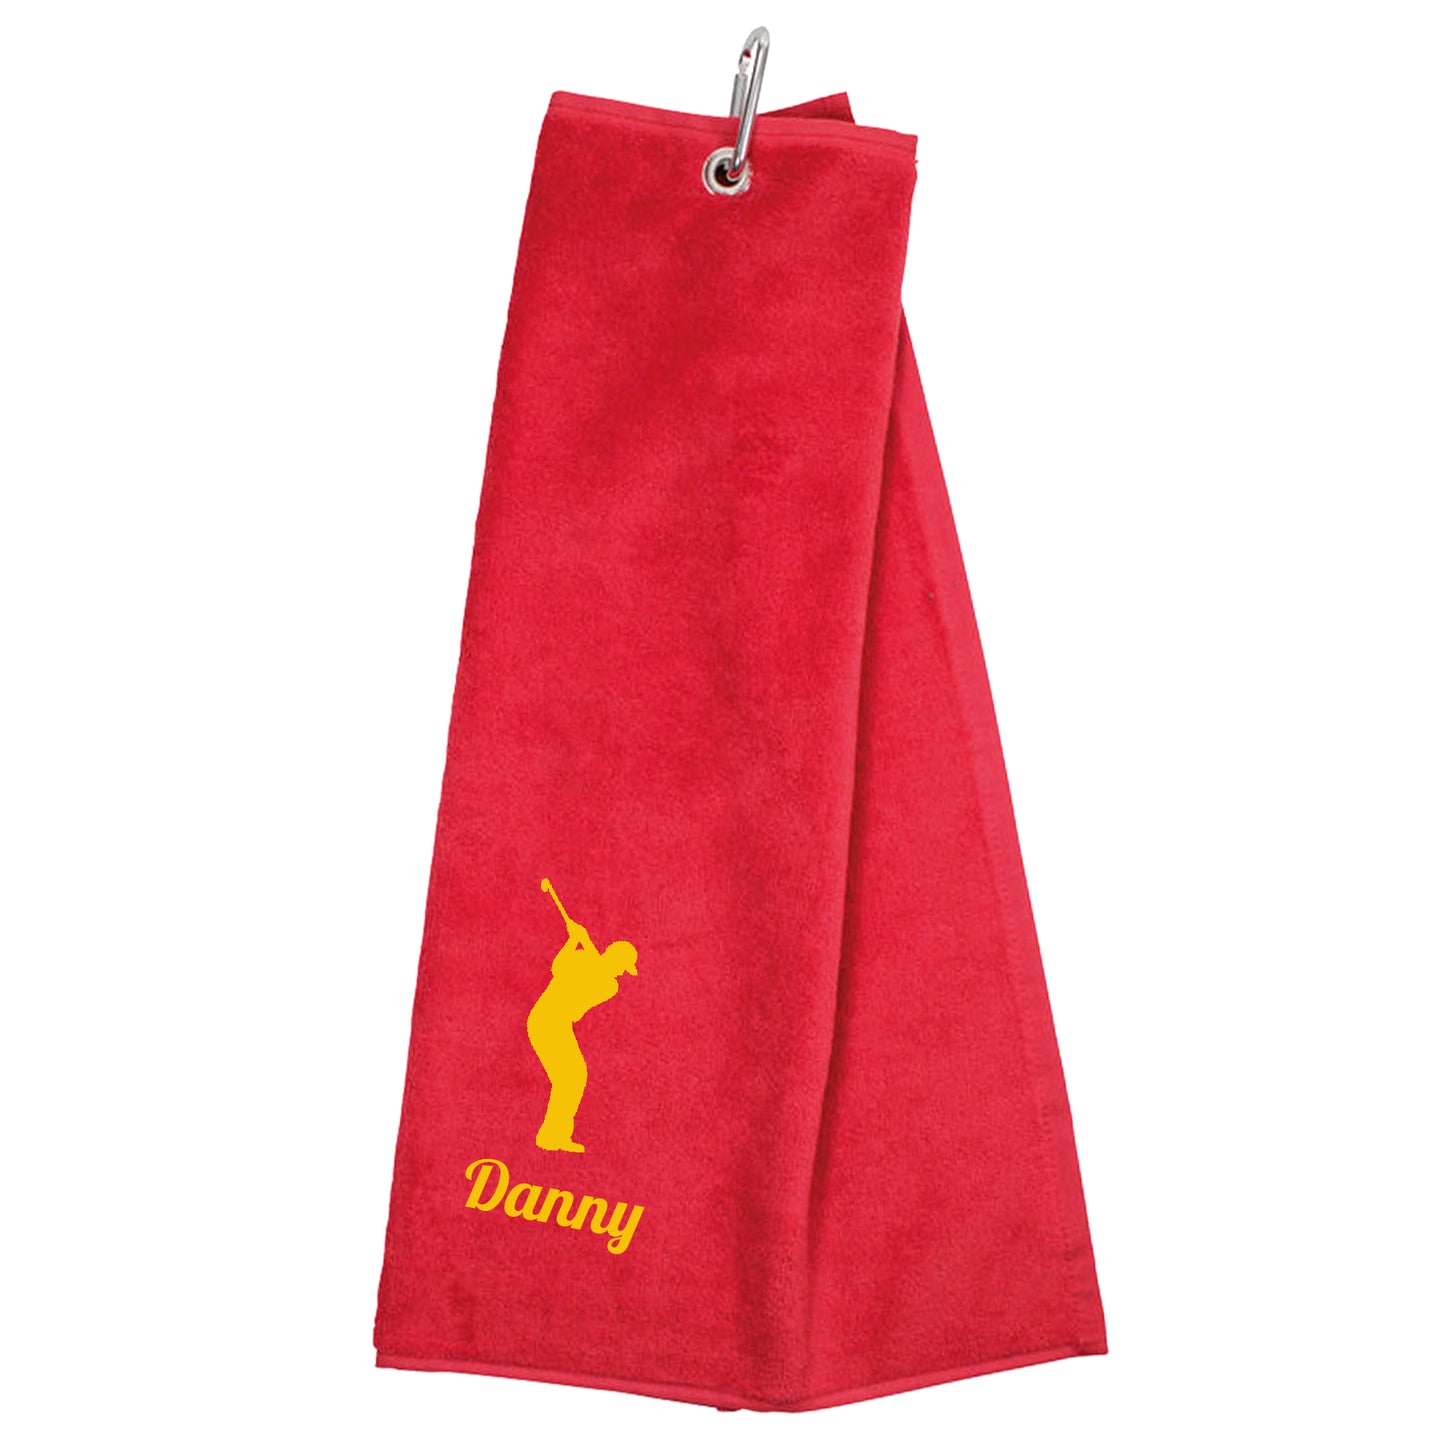 Personalised Embroidered Tri Fold GOLF Towel Trifold Towel with Carabiner Clip  - Always Looking Good - Red  